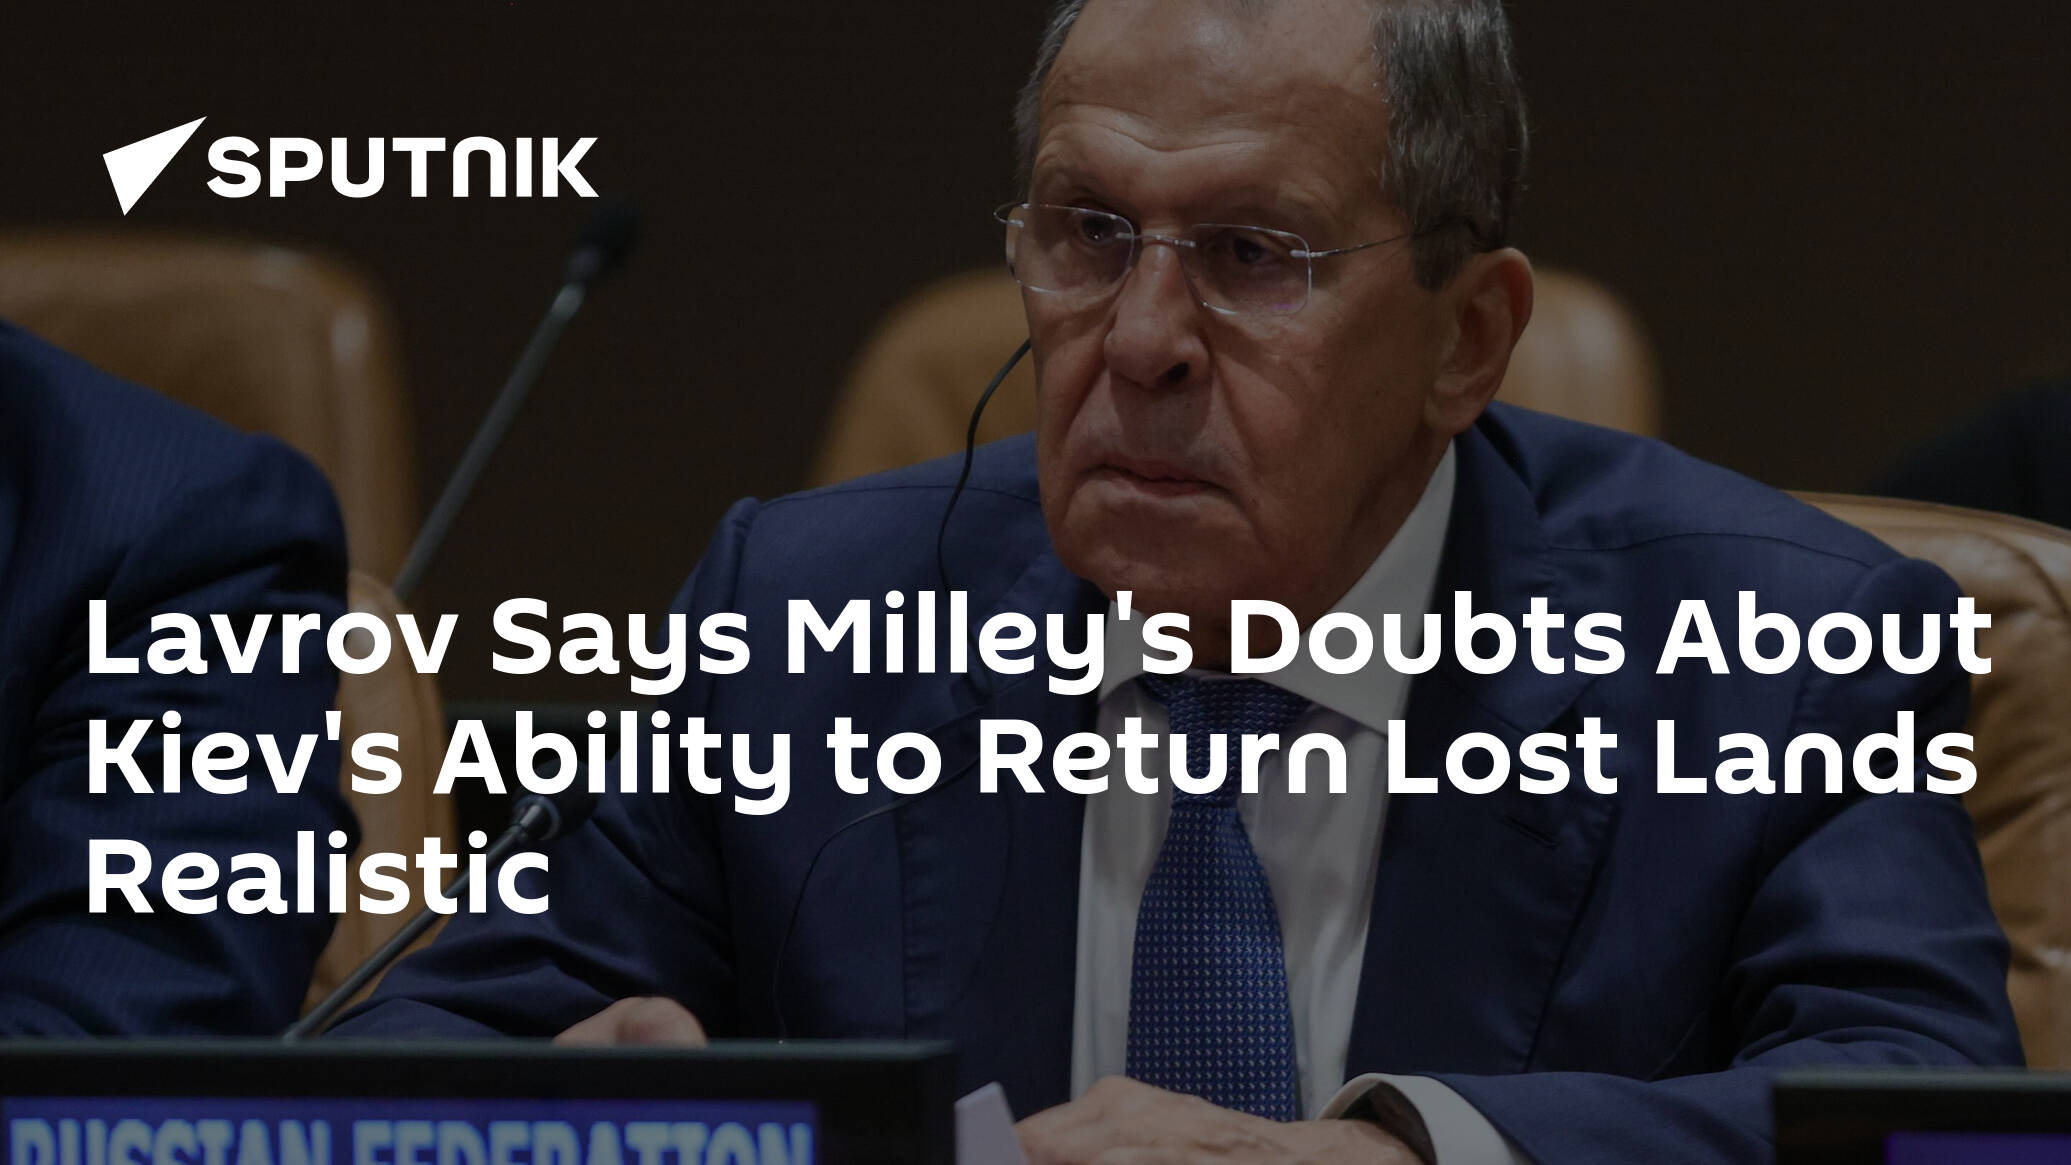 Lavrov Says Milley's Doubts About Kiev's Ability to Return Lost Lands Realistic